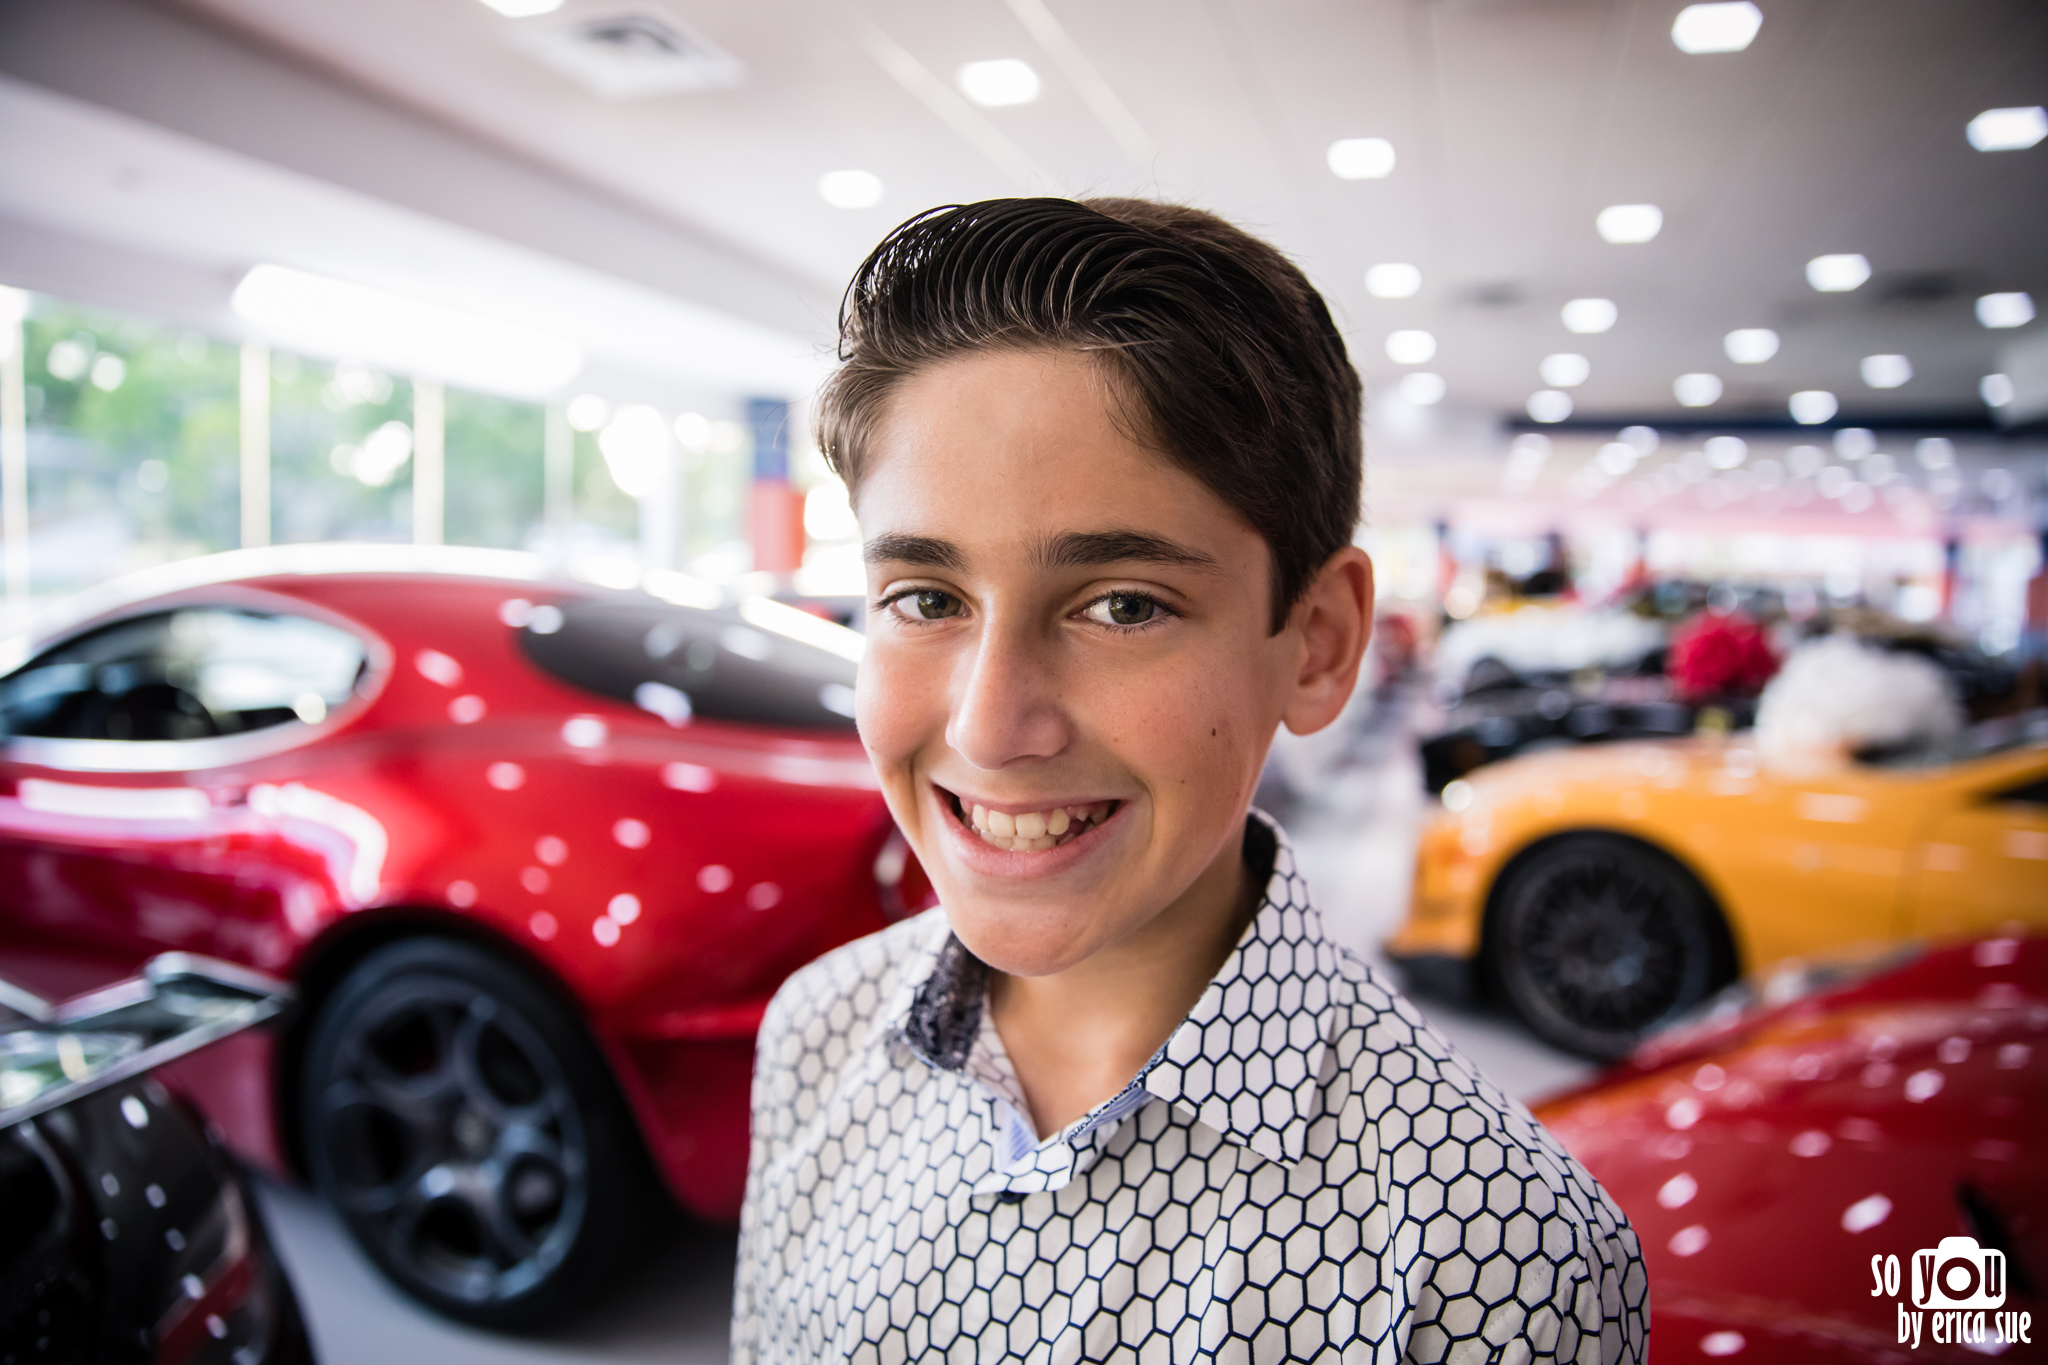 so-you-by-erica-sue-mitzvah-photographer-collection-luxury-car-ft-lauderdale-5034.jpg